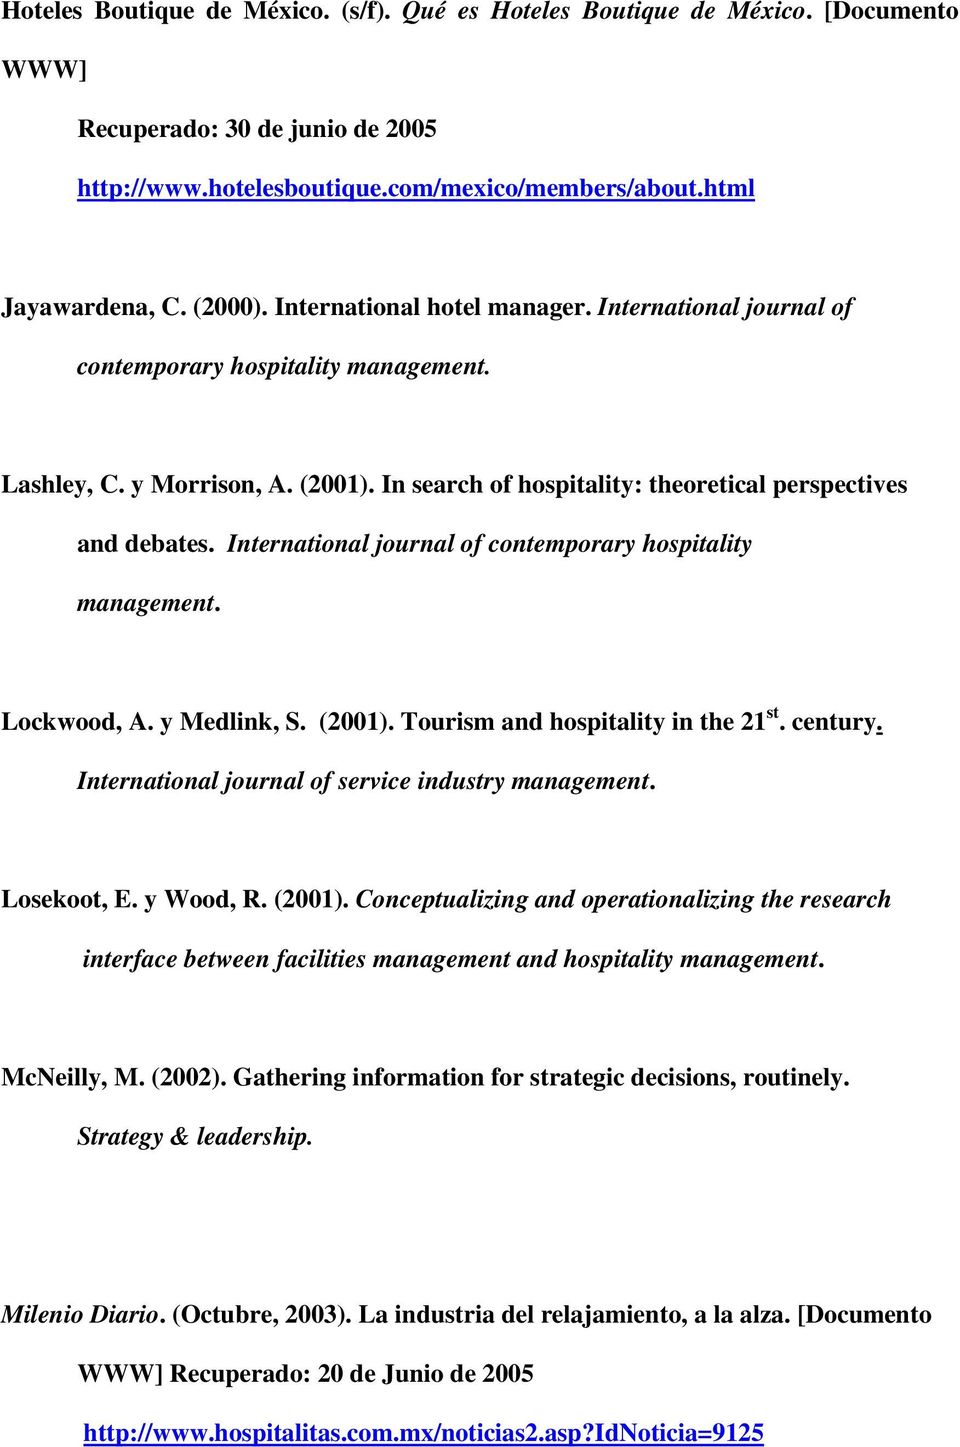 International journal of contemporary hospitality management. Lockwood, A. y Medlink, S. (2001). Tourism and hospitality in the 21 st. century. International journal of service industry management.